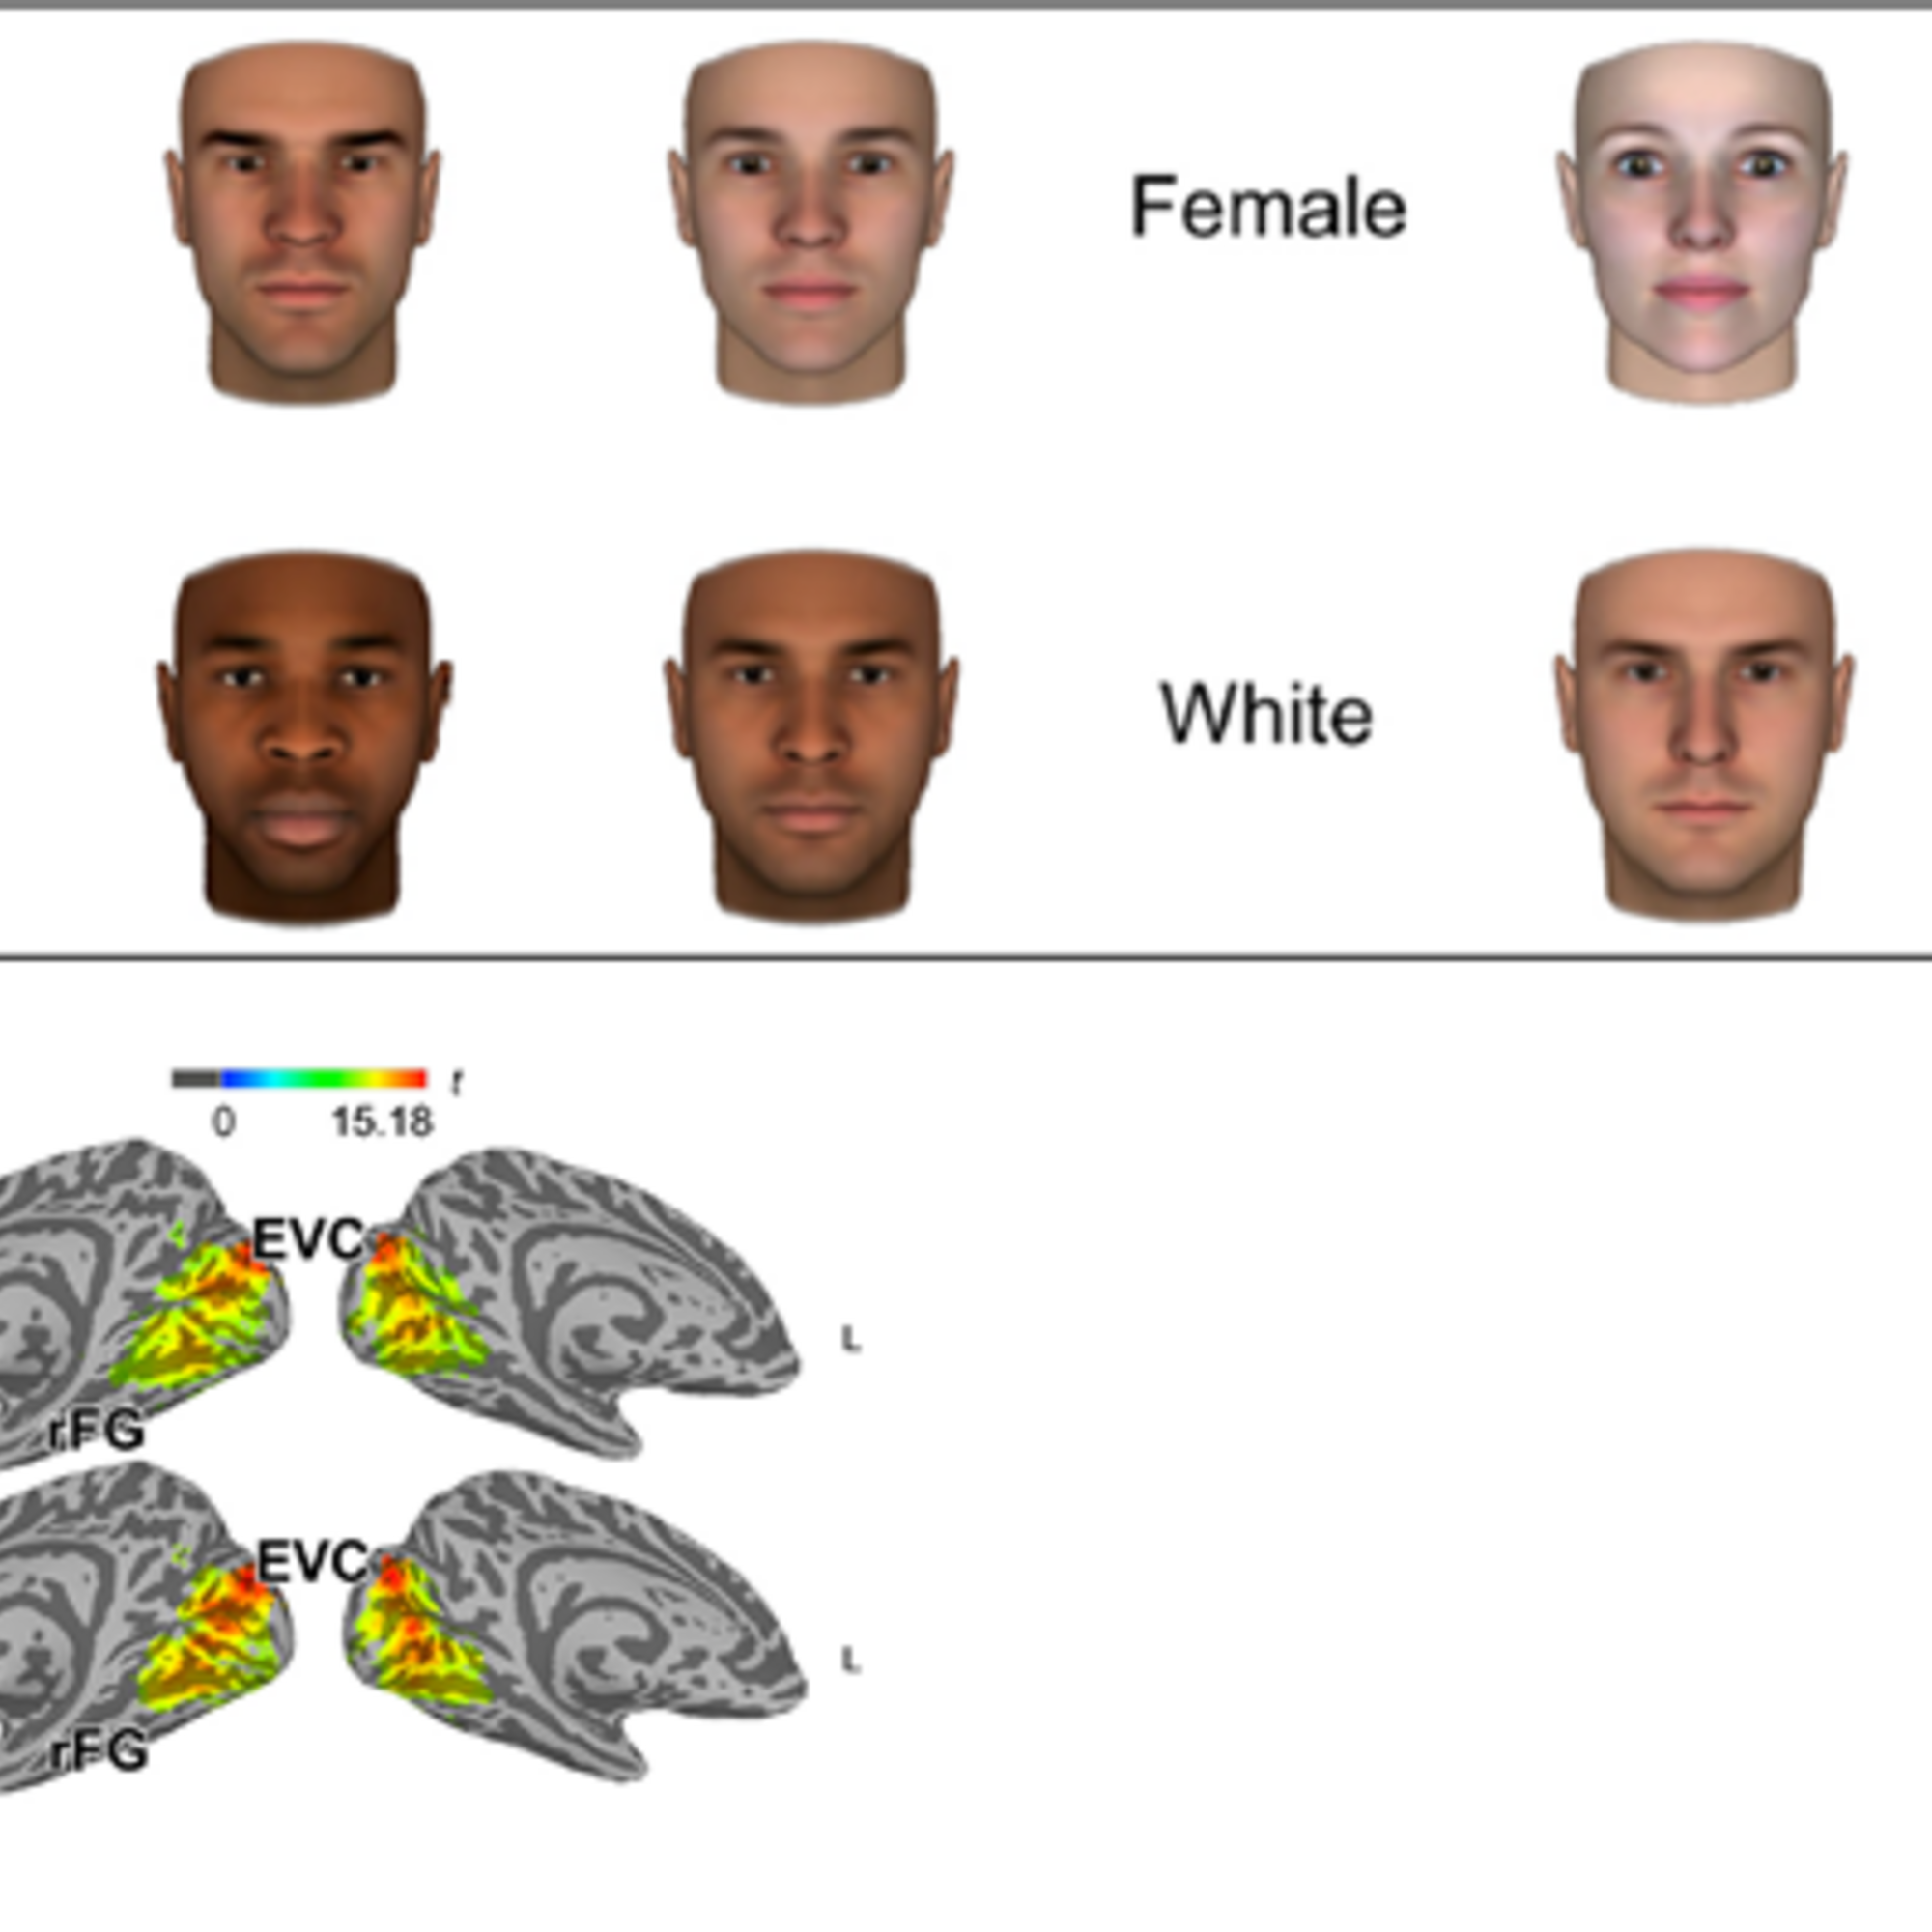 FIGURE 1 | Pictures of sex/gender and “race” stimuli (top). The stimuli and brain activation (buttom) depicted above show an example of fMRI research belonging to the field of social recognition/categorisation. The brain pictures depict activation in the back part of the cortex, more precisely, the early visual field (ECV), and in a region called fusiform gyrus (rFG, r for “right”). Excerpts of figures from: Stolier & Freeman (2017).